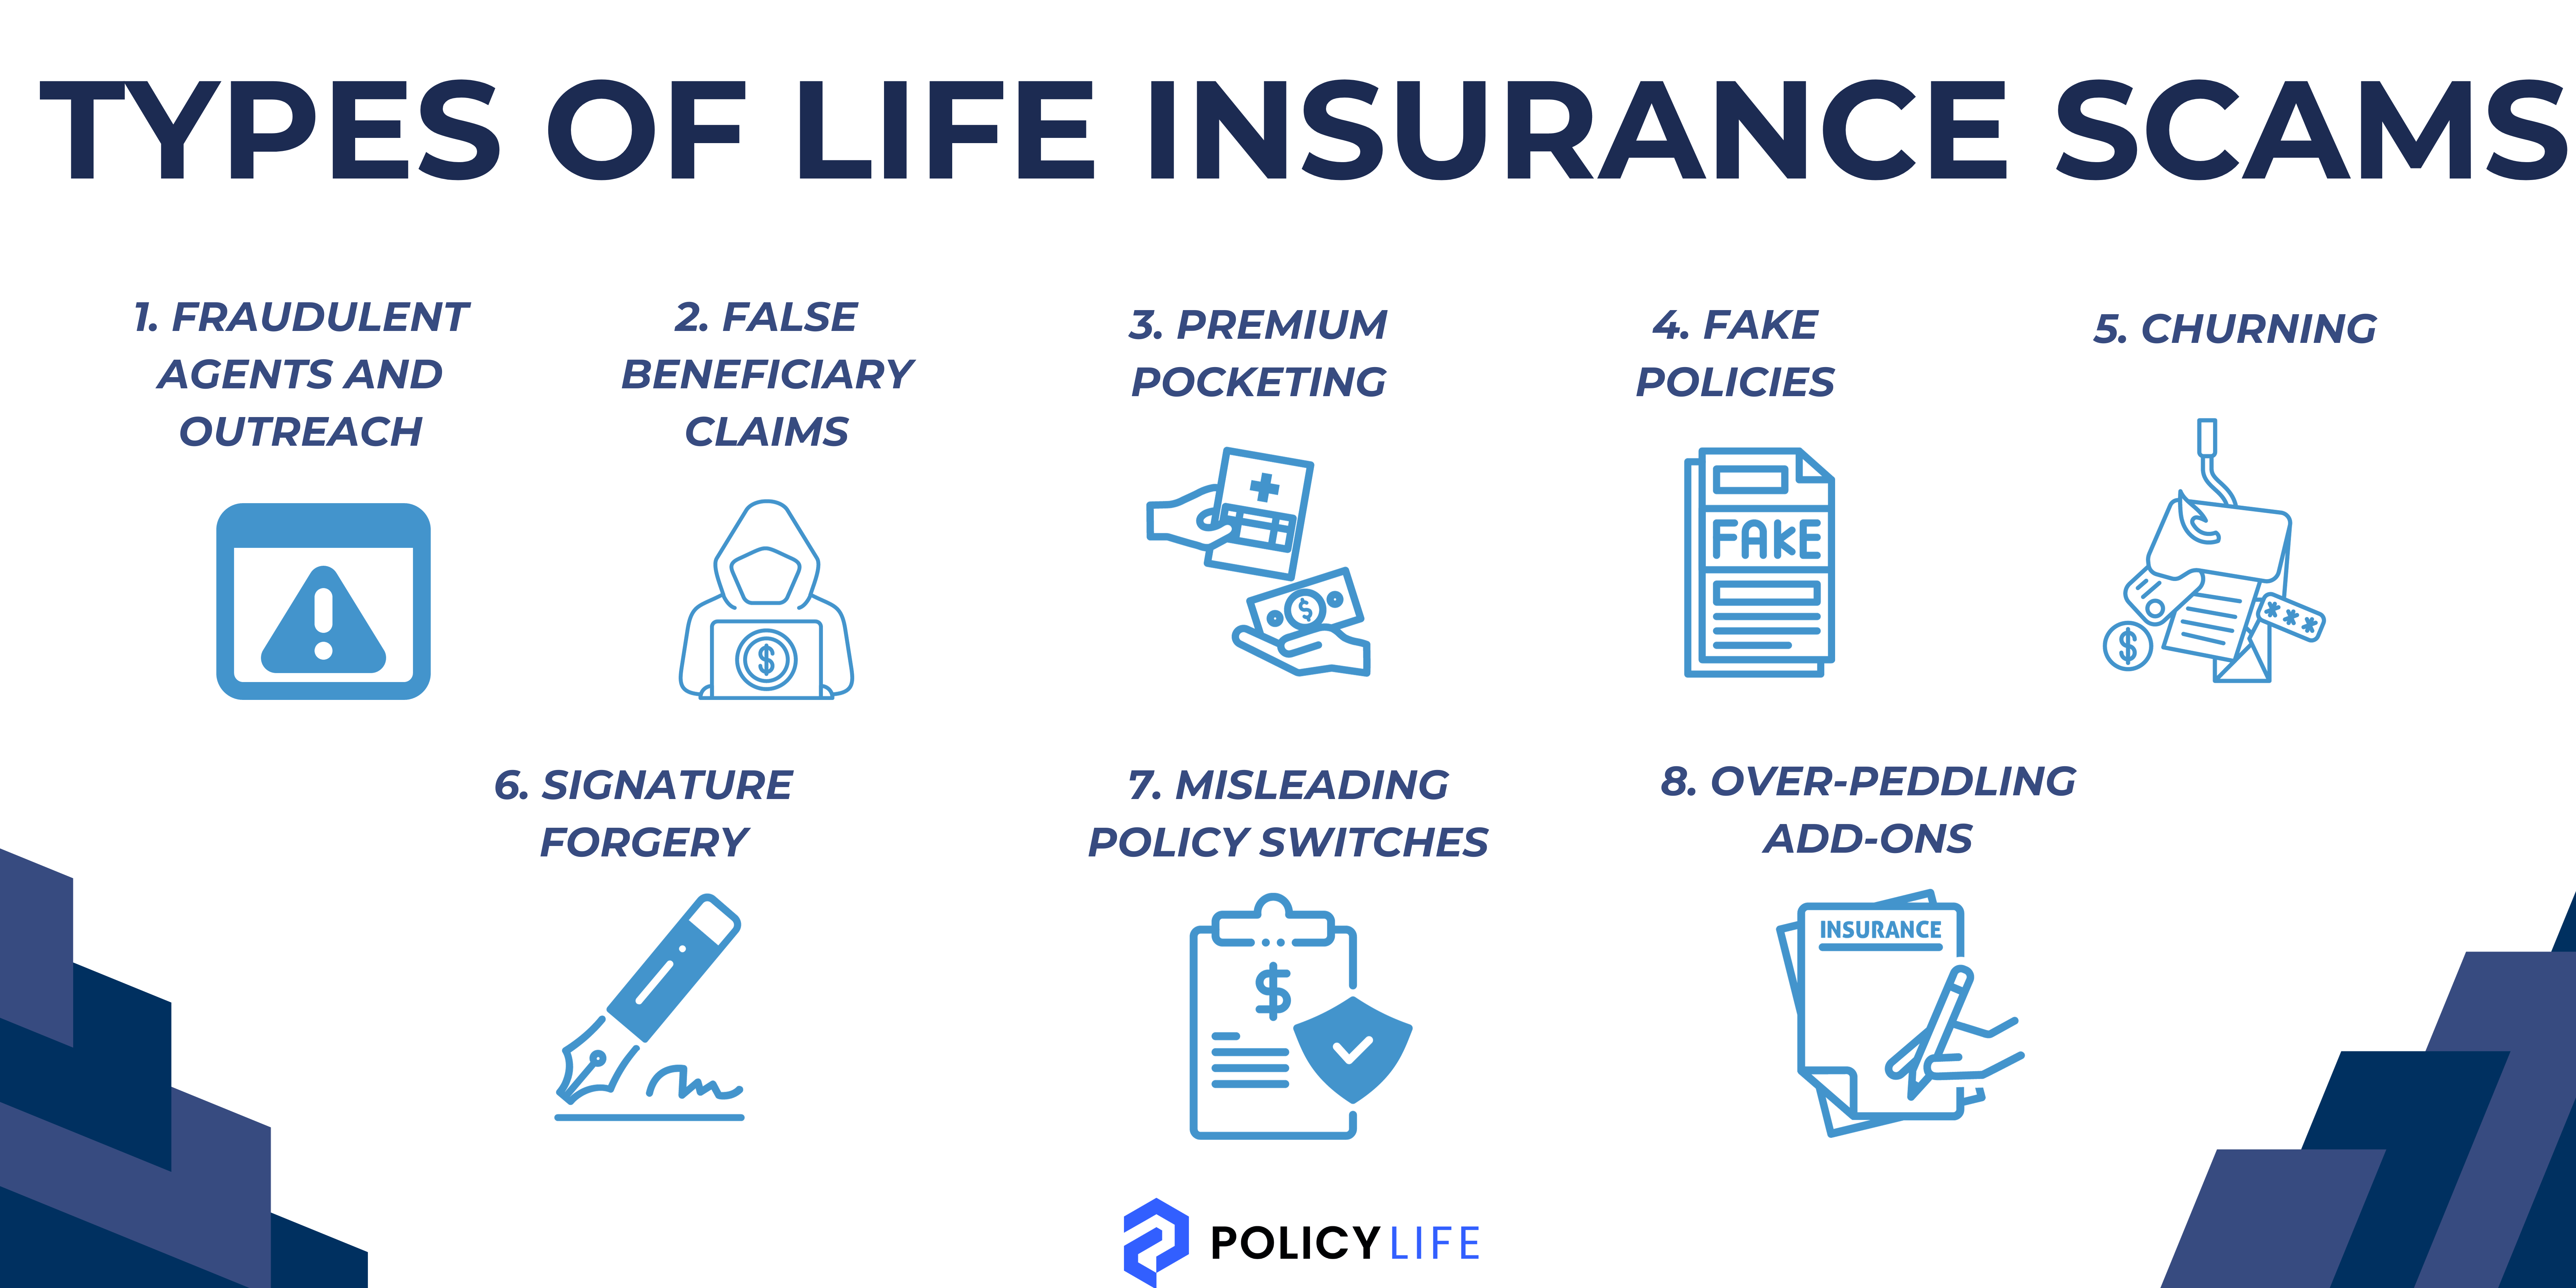 Types of life insurance scams